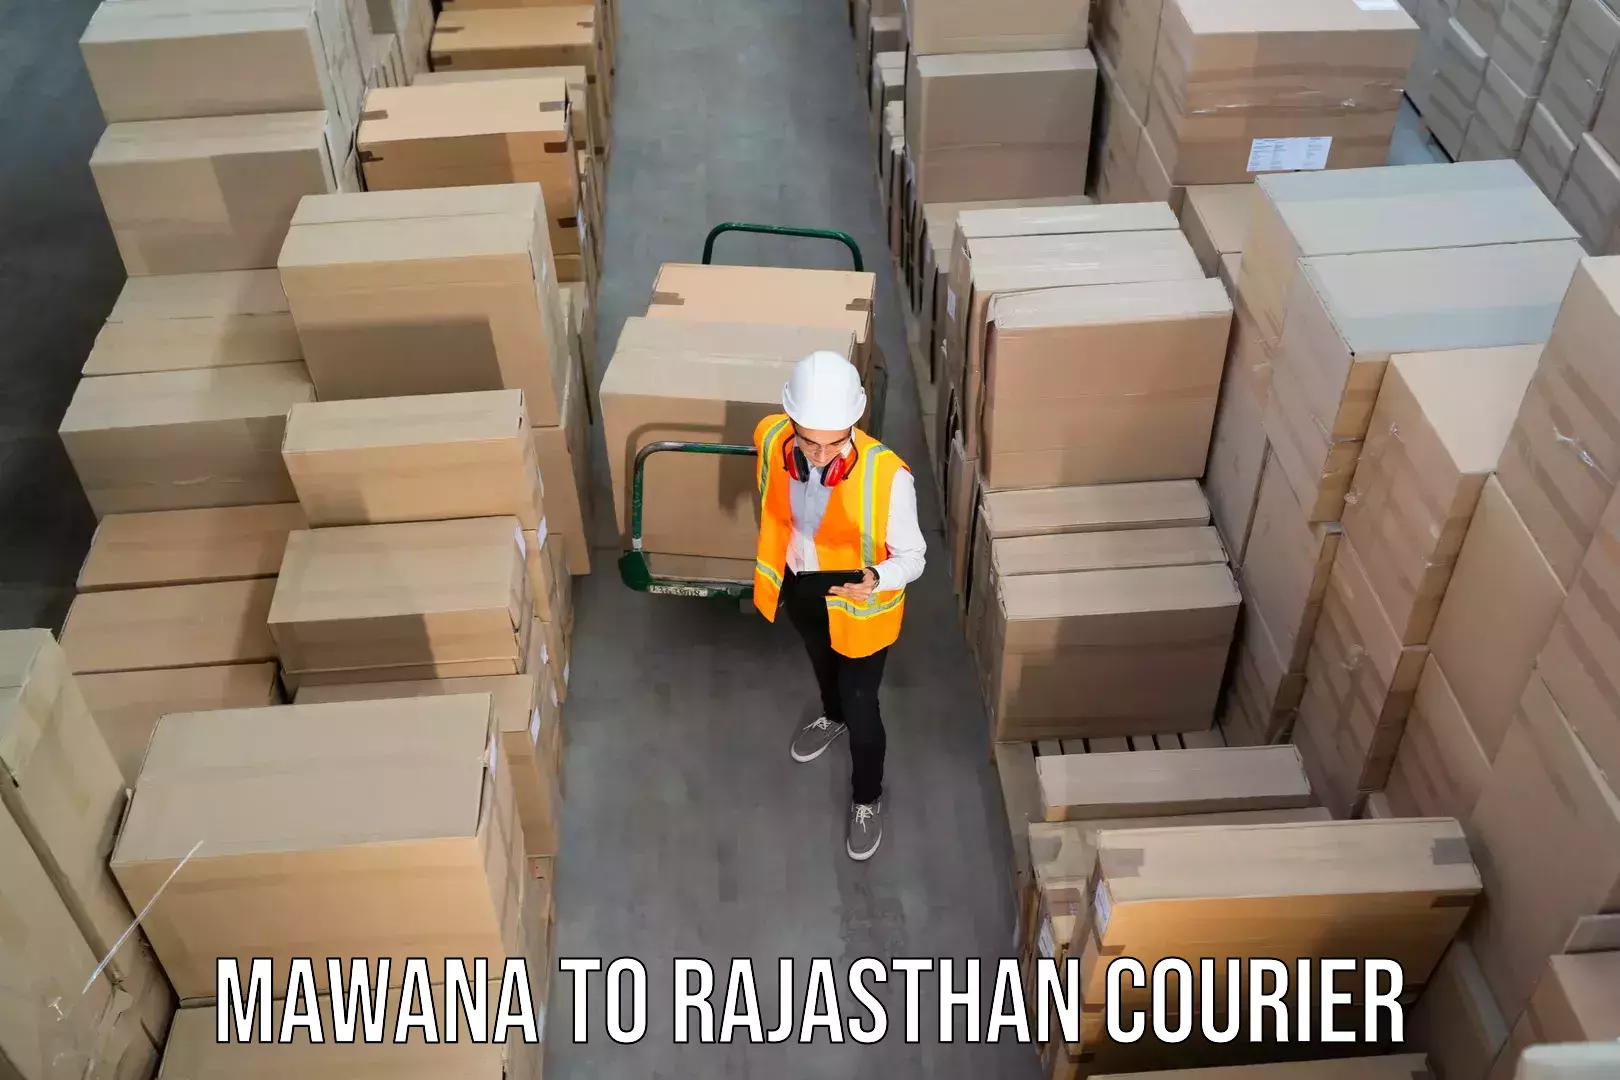 24/7 courier service in Mawana to Lakheri